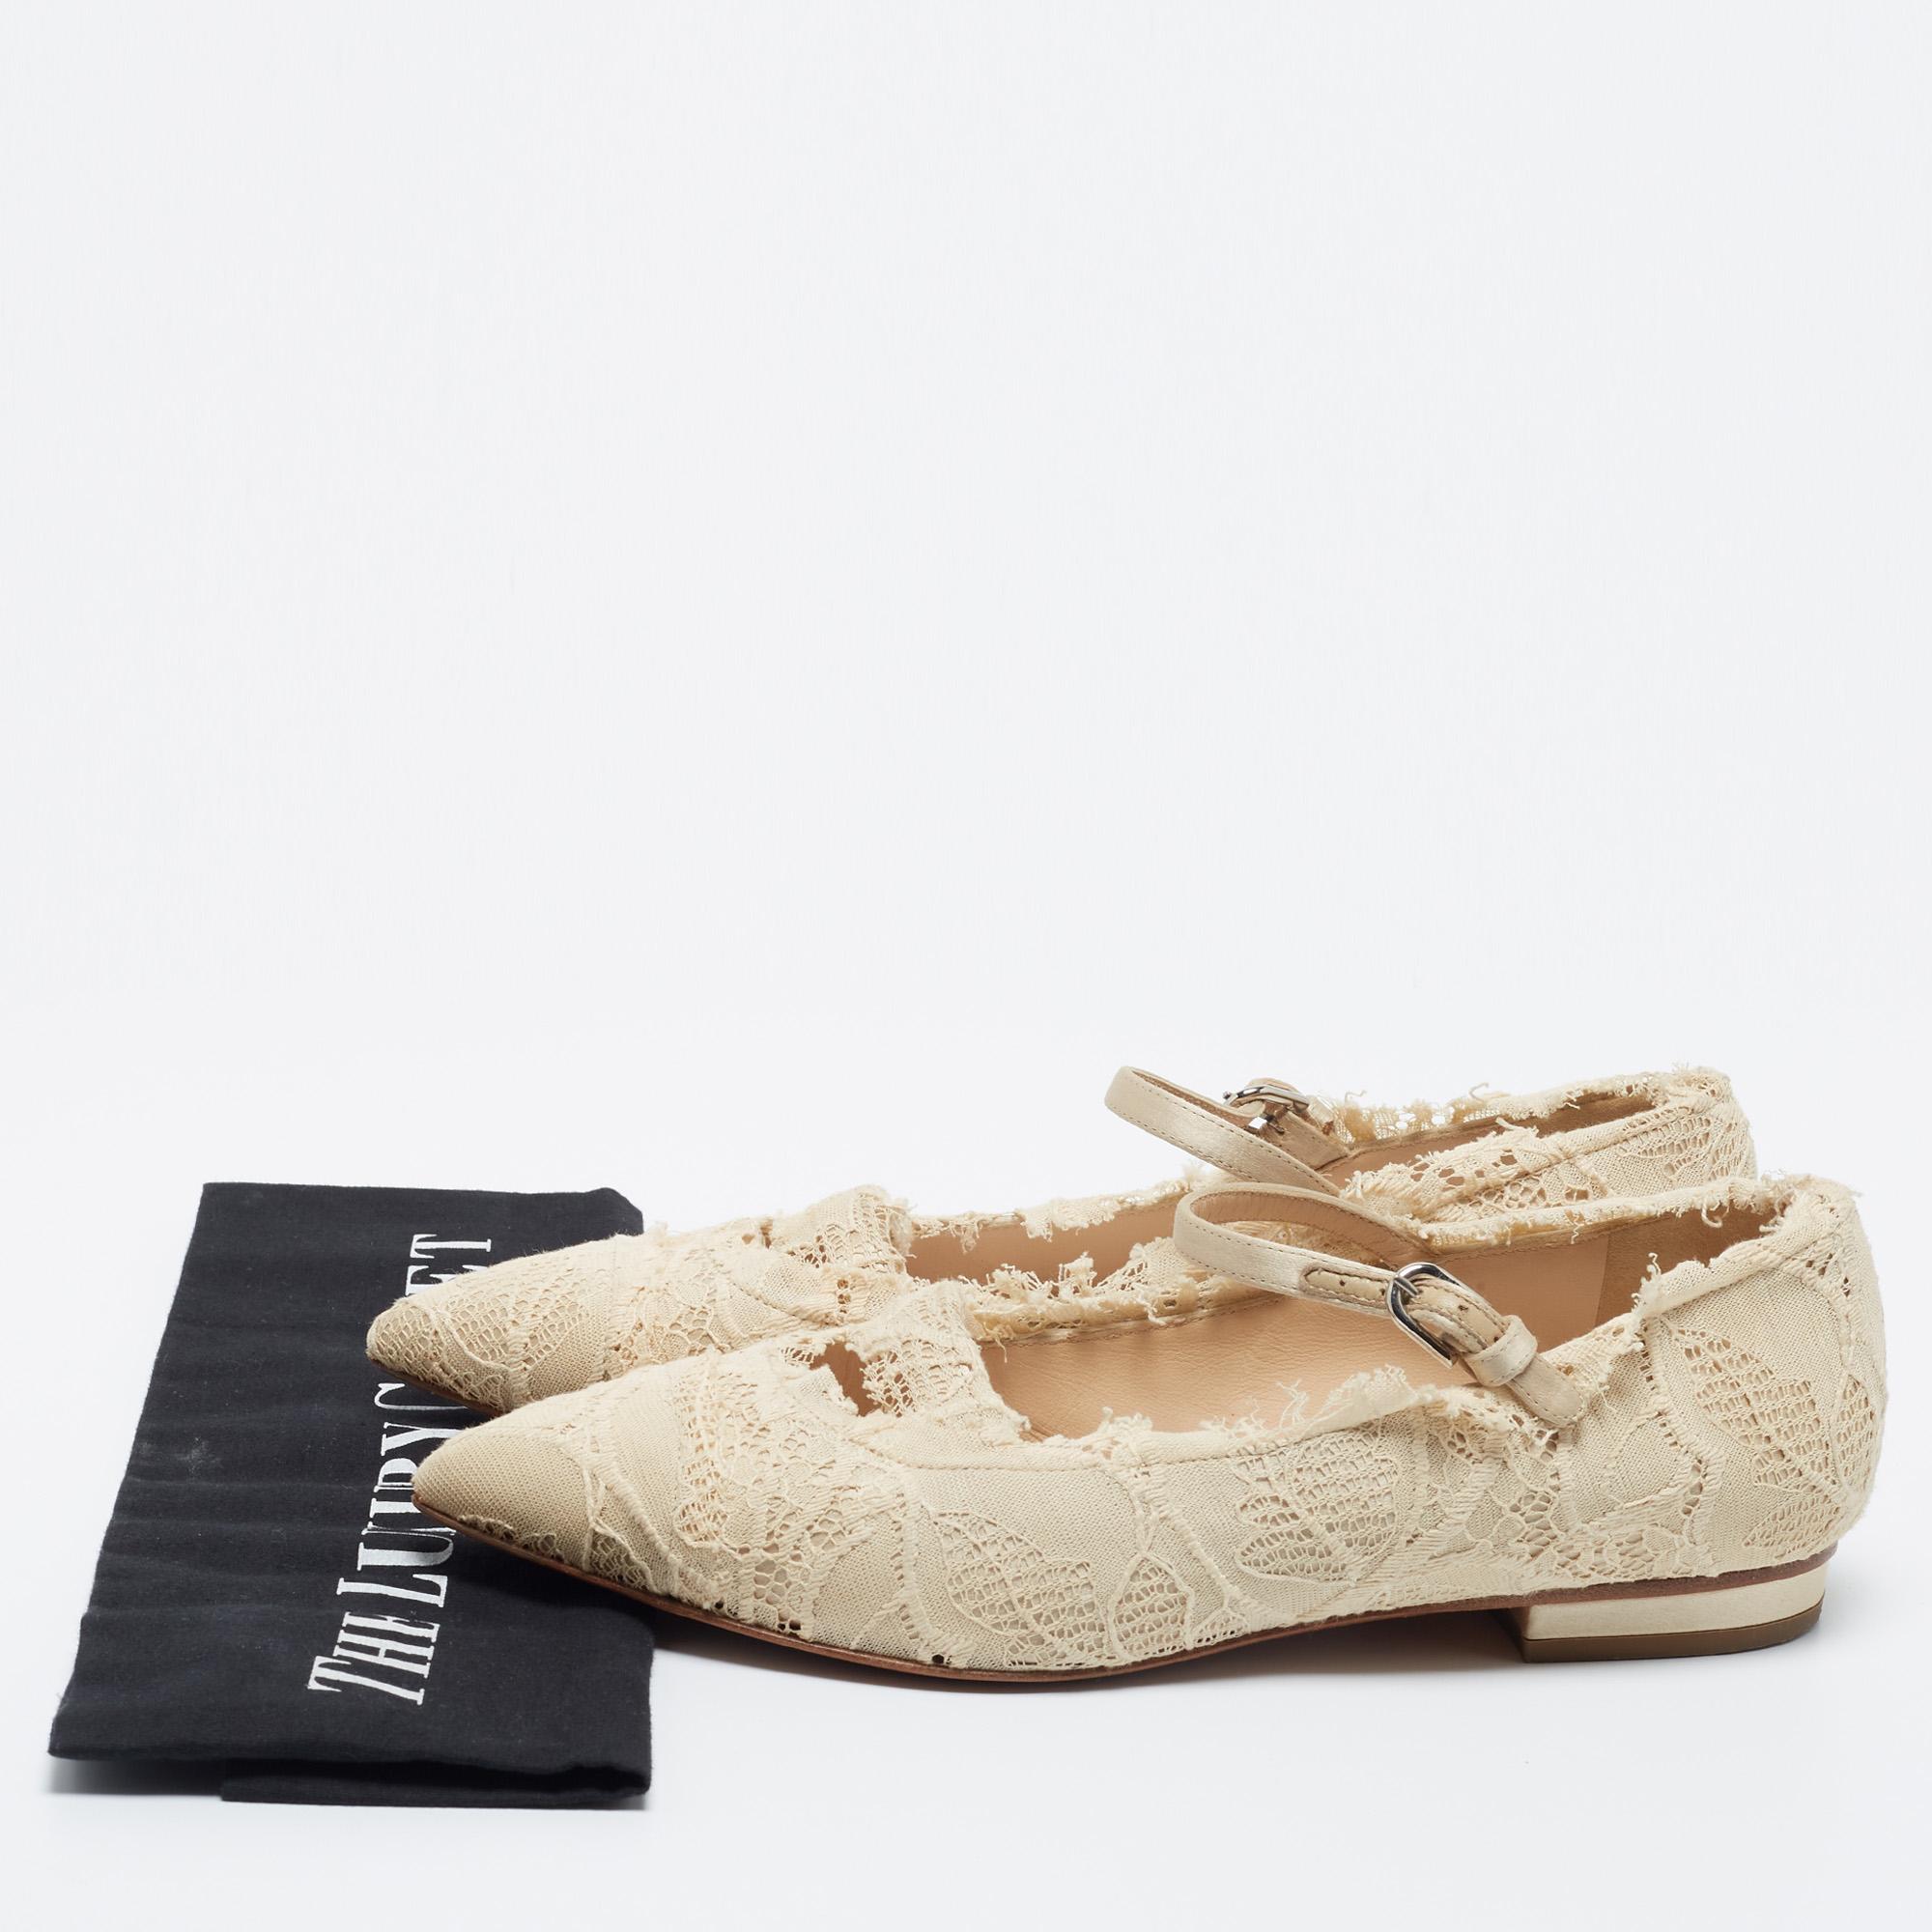 Chanel Beige Lace Pointed Toe Ballet Flats Size 37.5 4